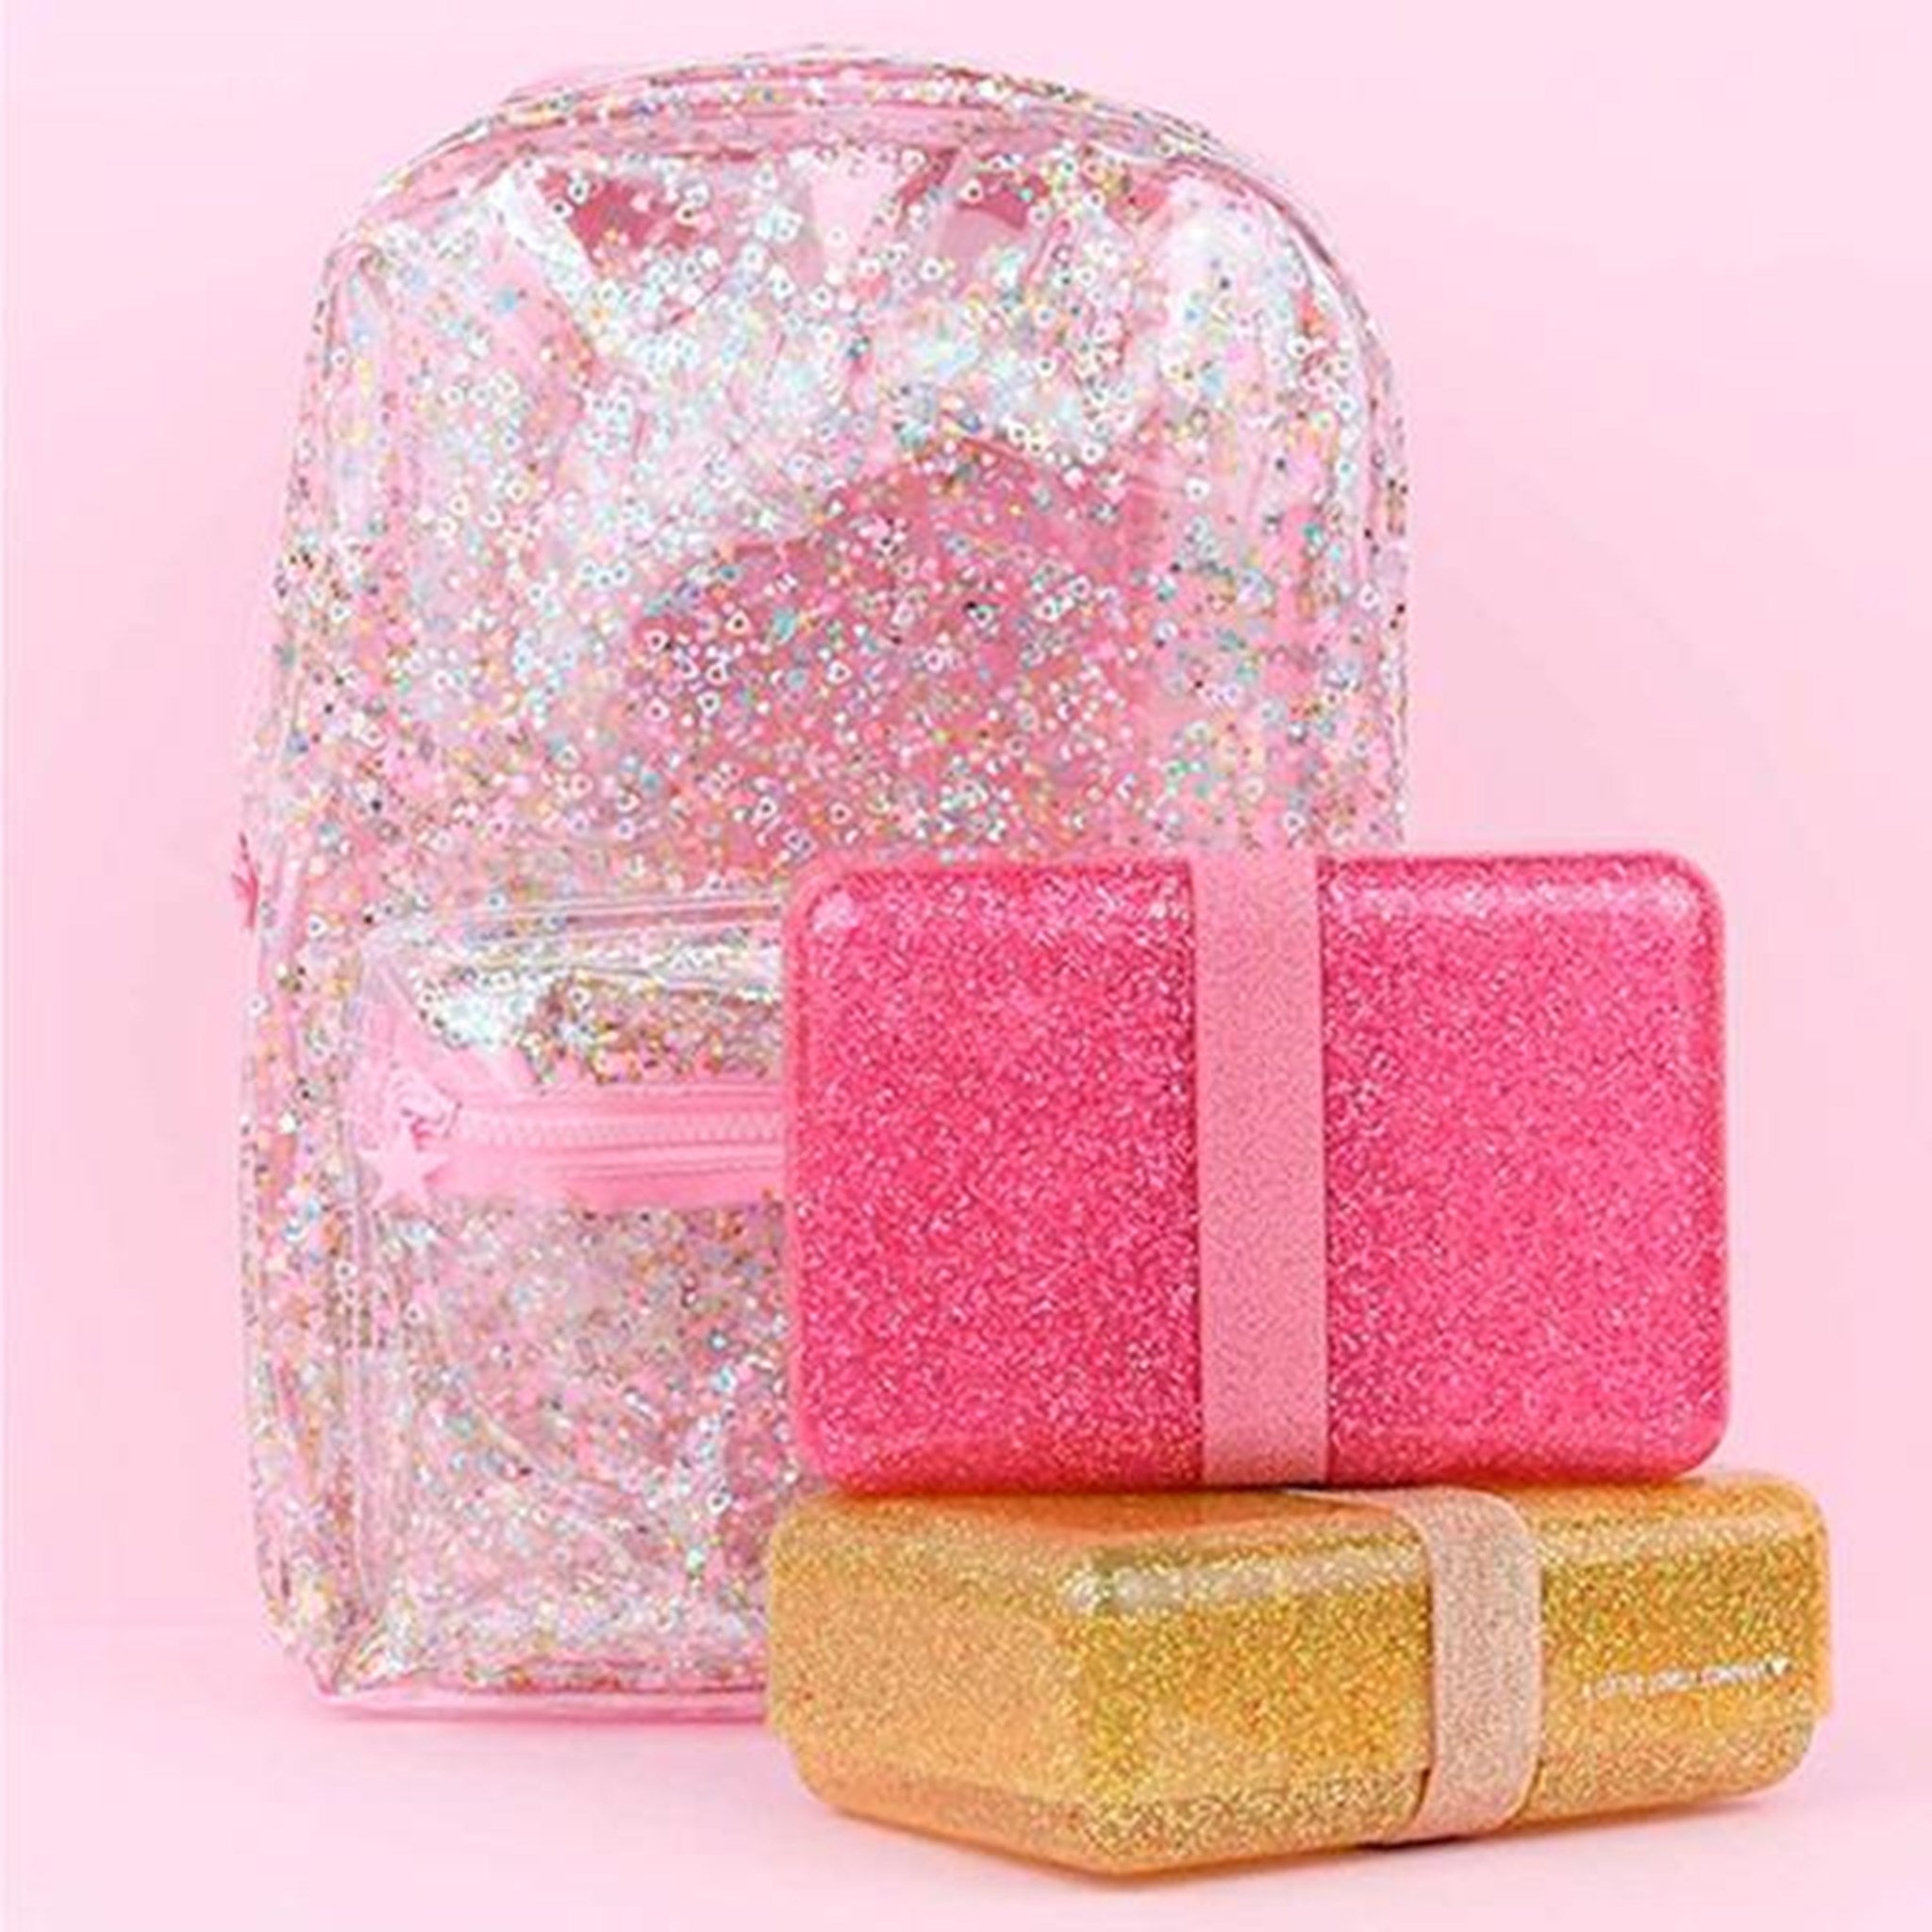 A Little Lovely Company Lunchbox Glitter Pink 2